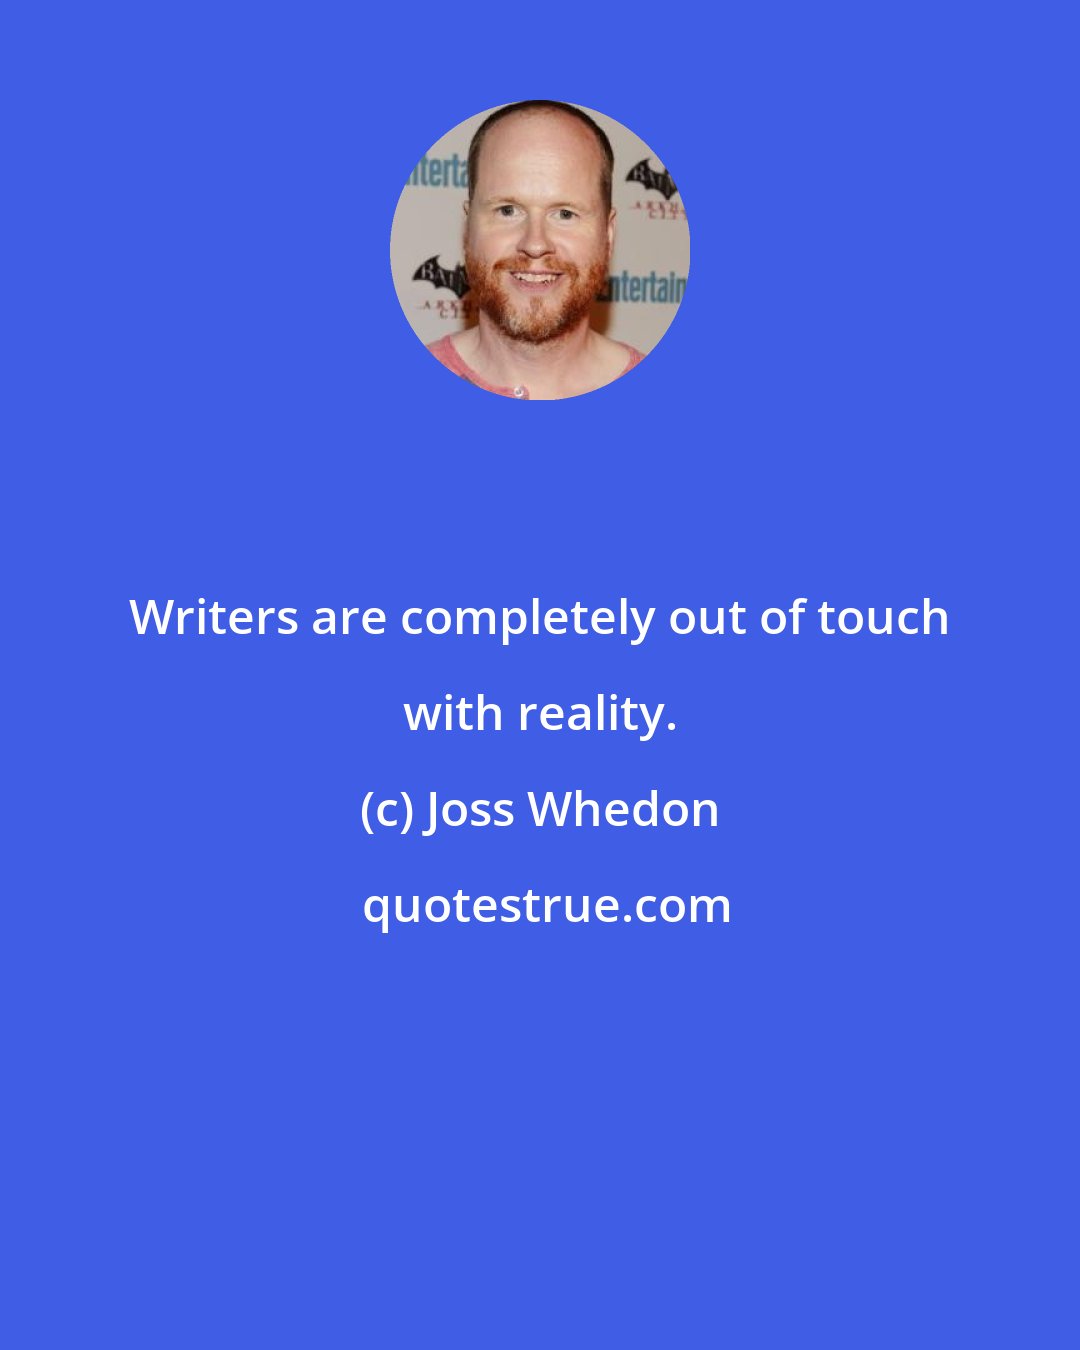 Joss Whedon: Writers are completely out of touch with reality.